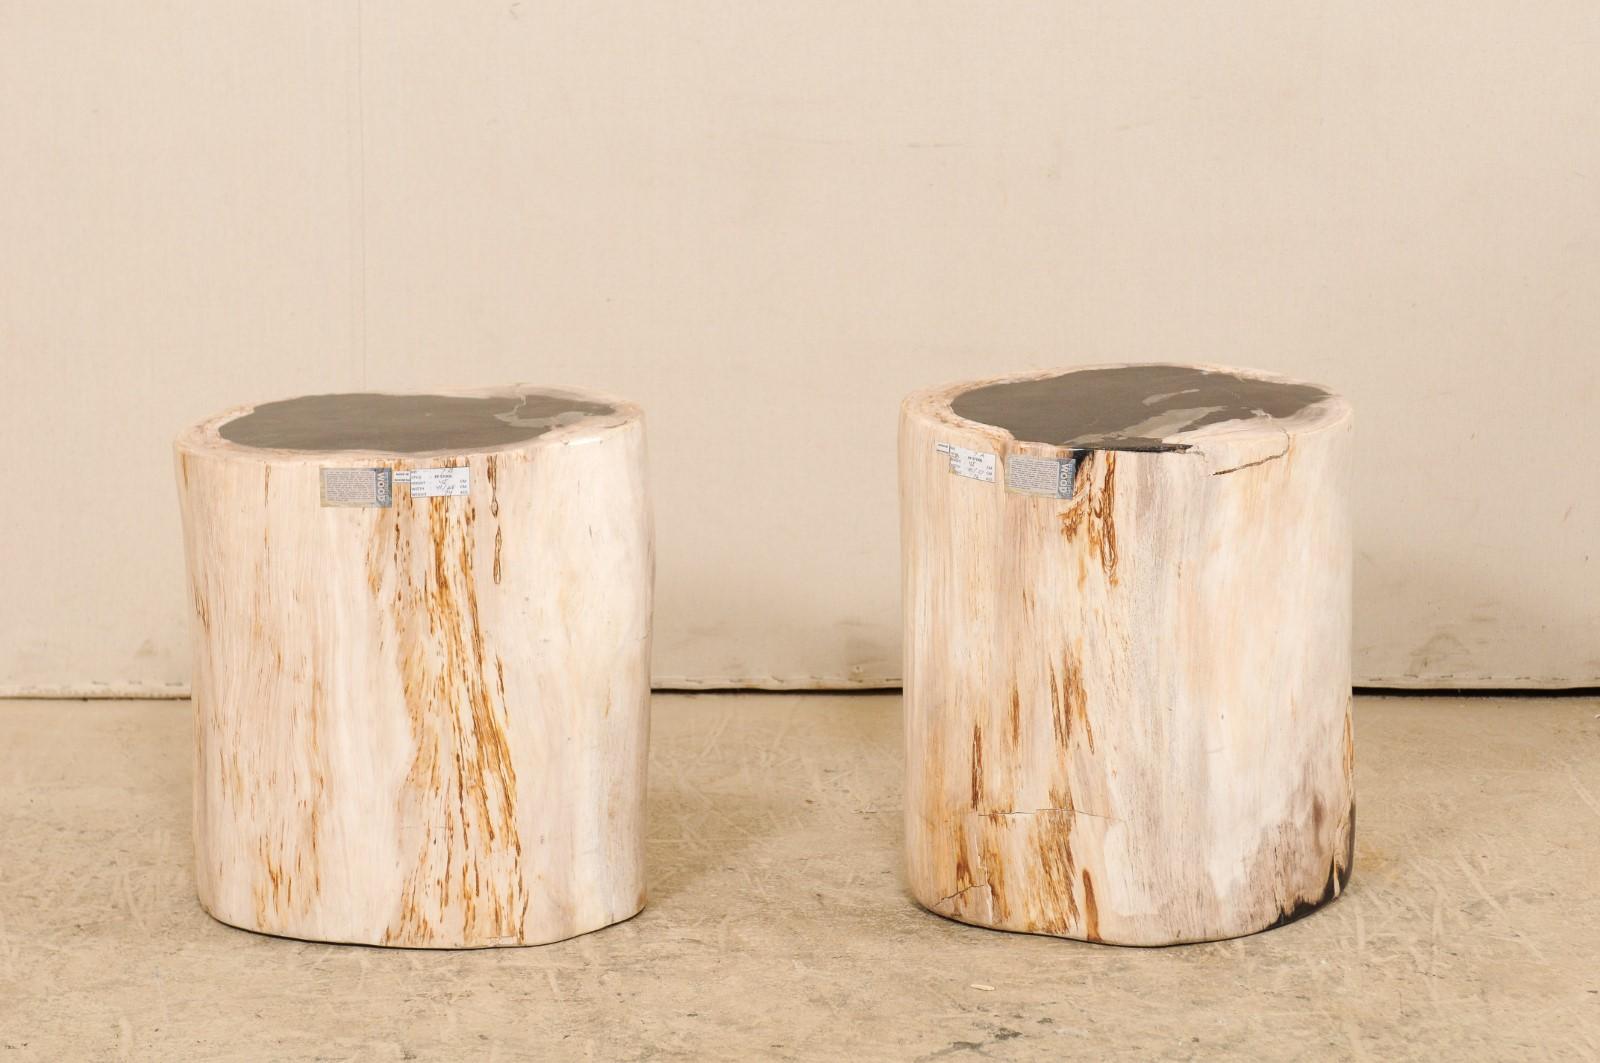 Pair of Petrified Wood Stools or Pedestal Tables with Black Tops & Light Sides 4